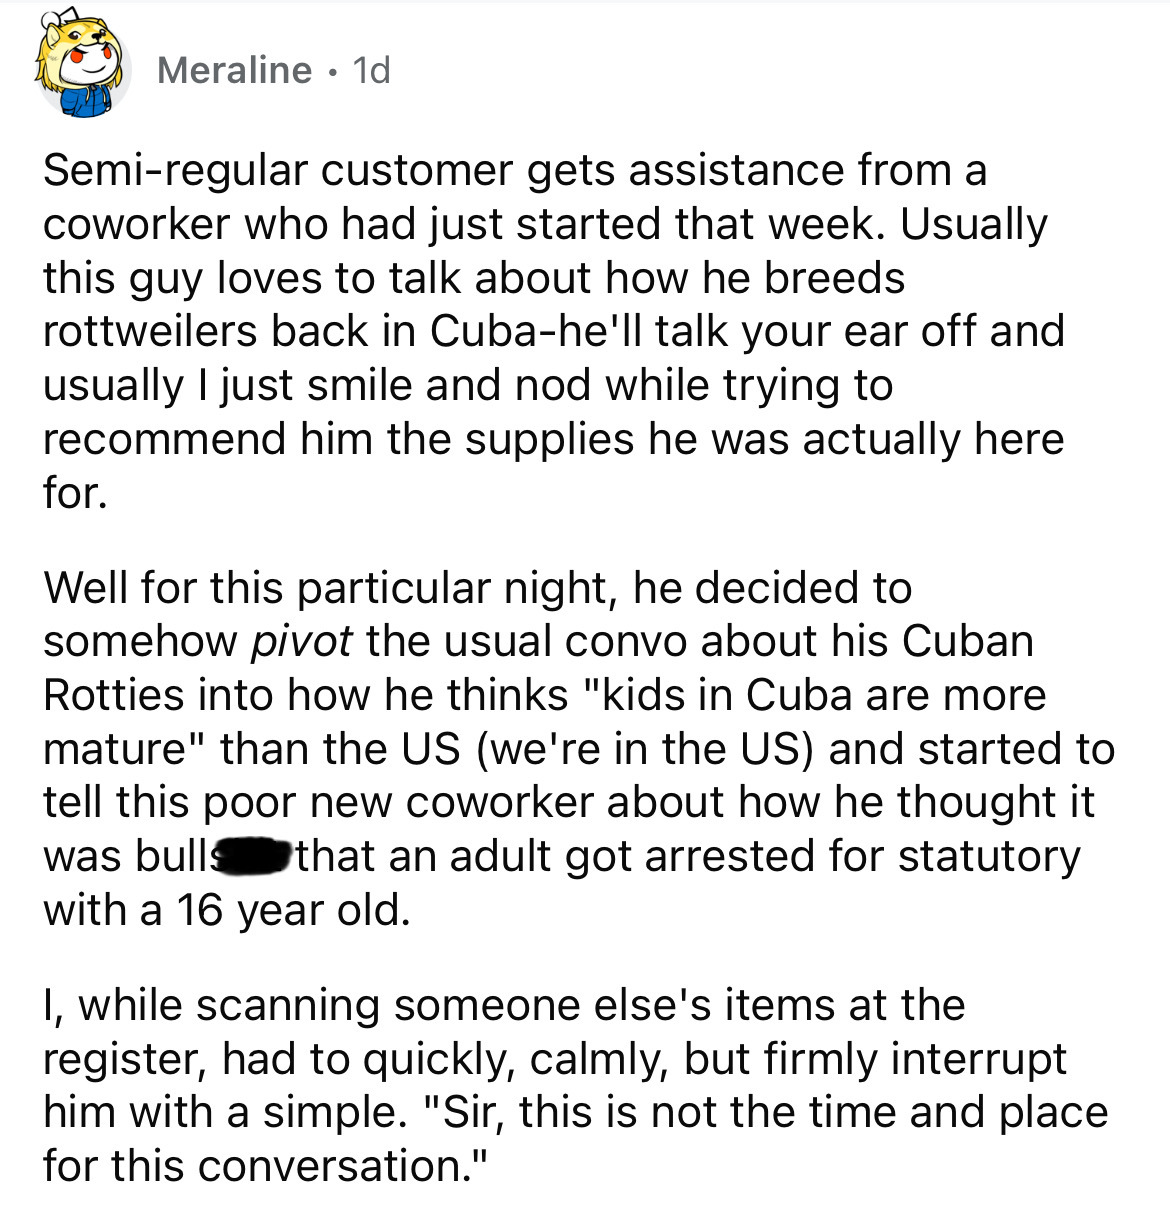 number - Meraline 1d Semiregular customer gets assistance from a coworker who had just started that week. Usually this guy loves to talk about how he breeds rottweilers back in Cubahe'll talk your ear off and usually I just smile and nod while trying to r